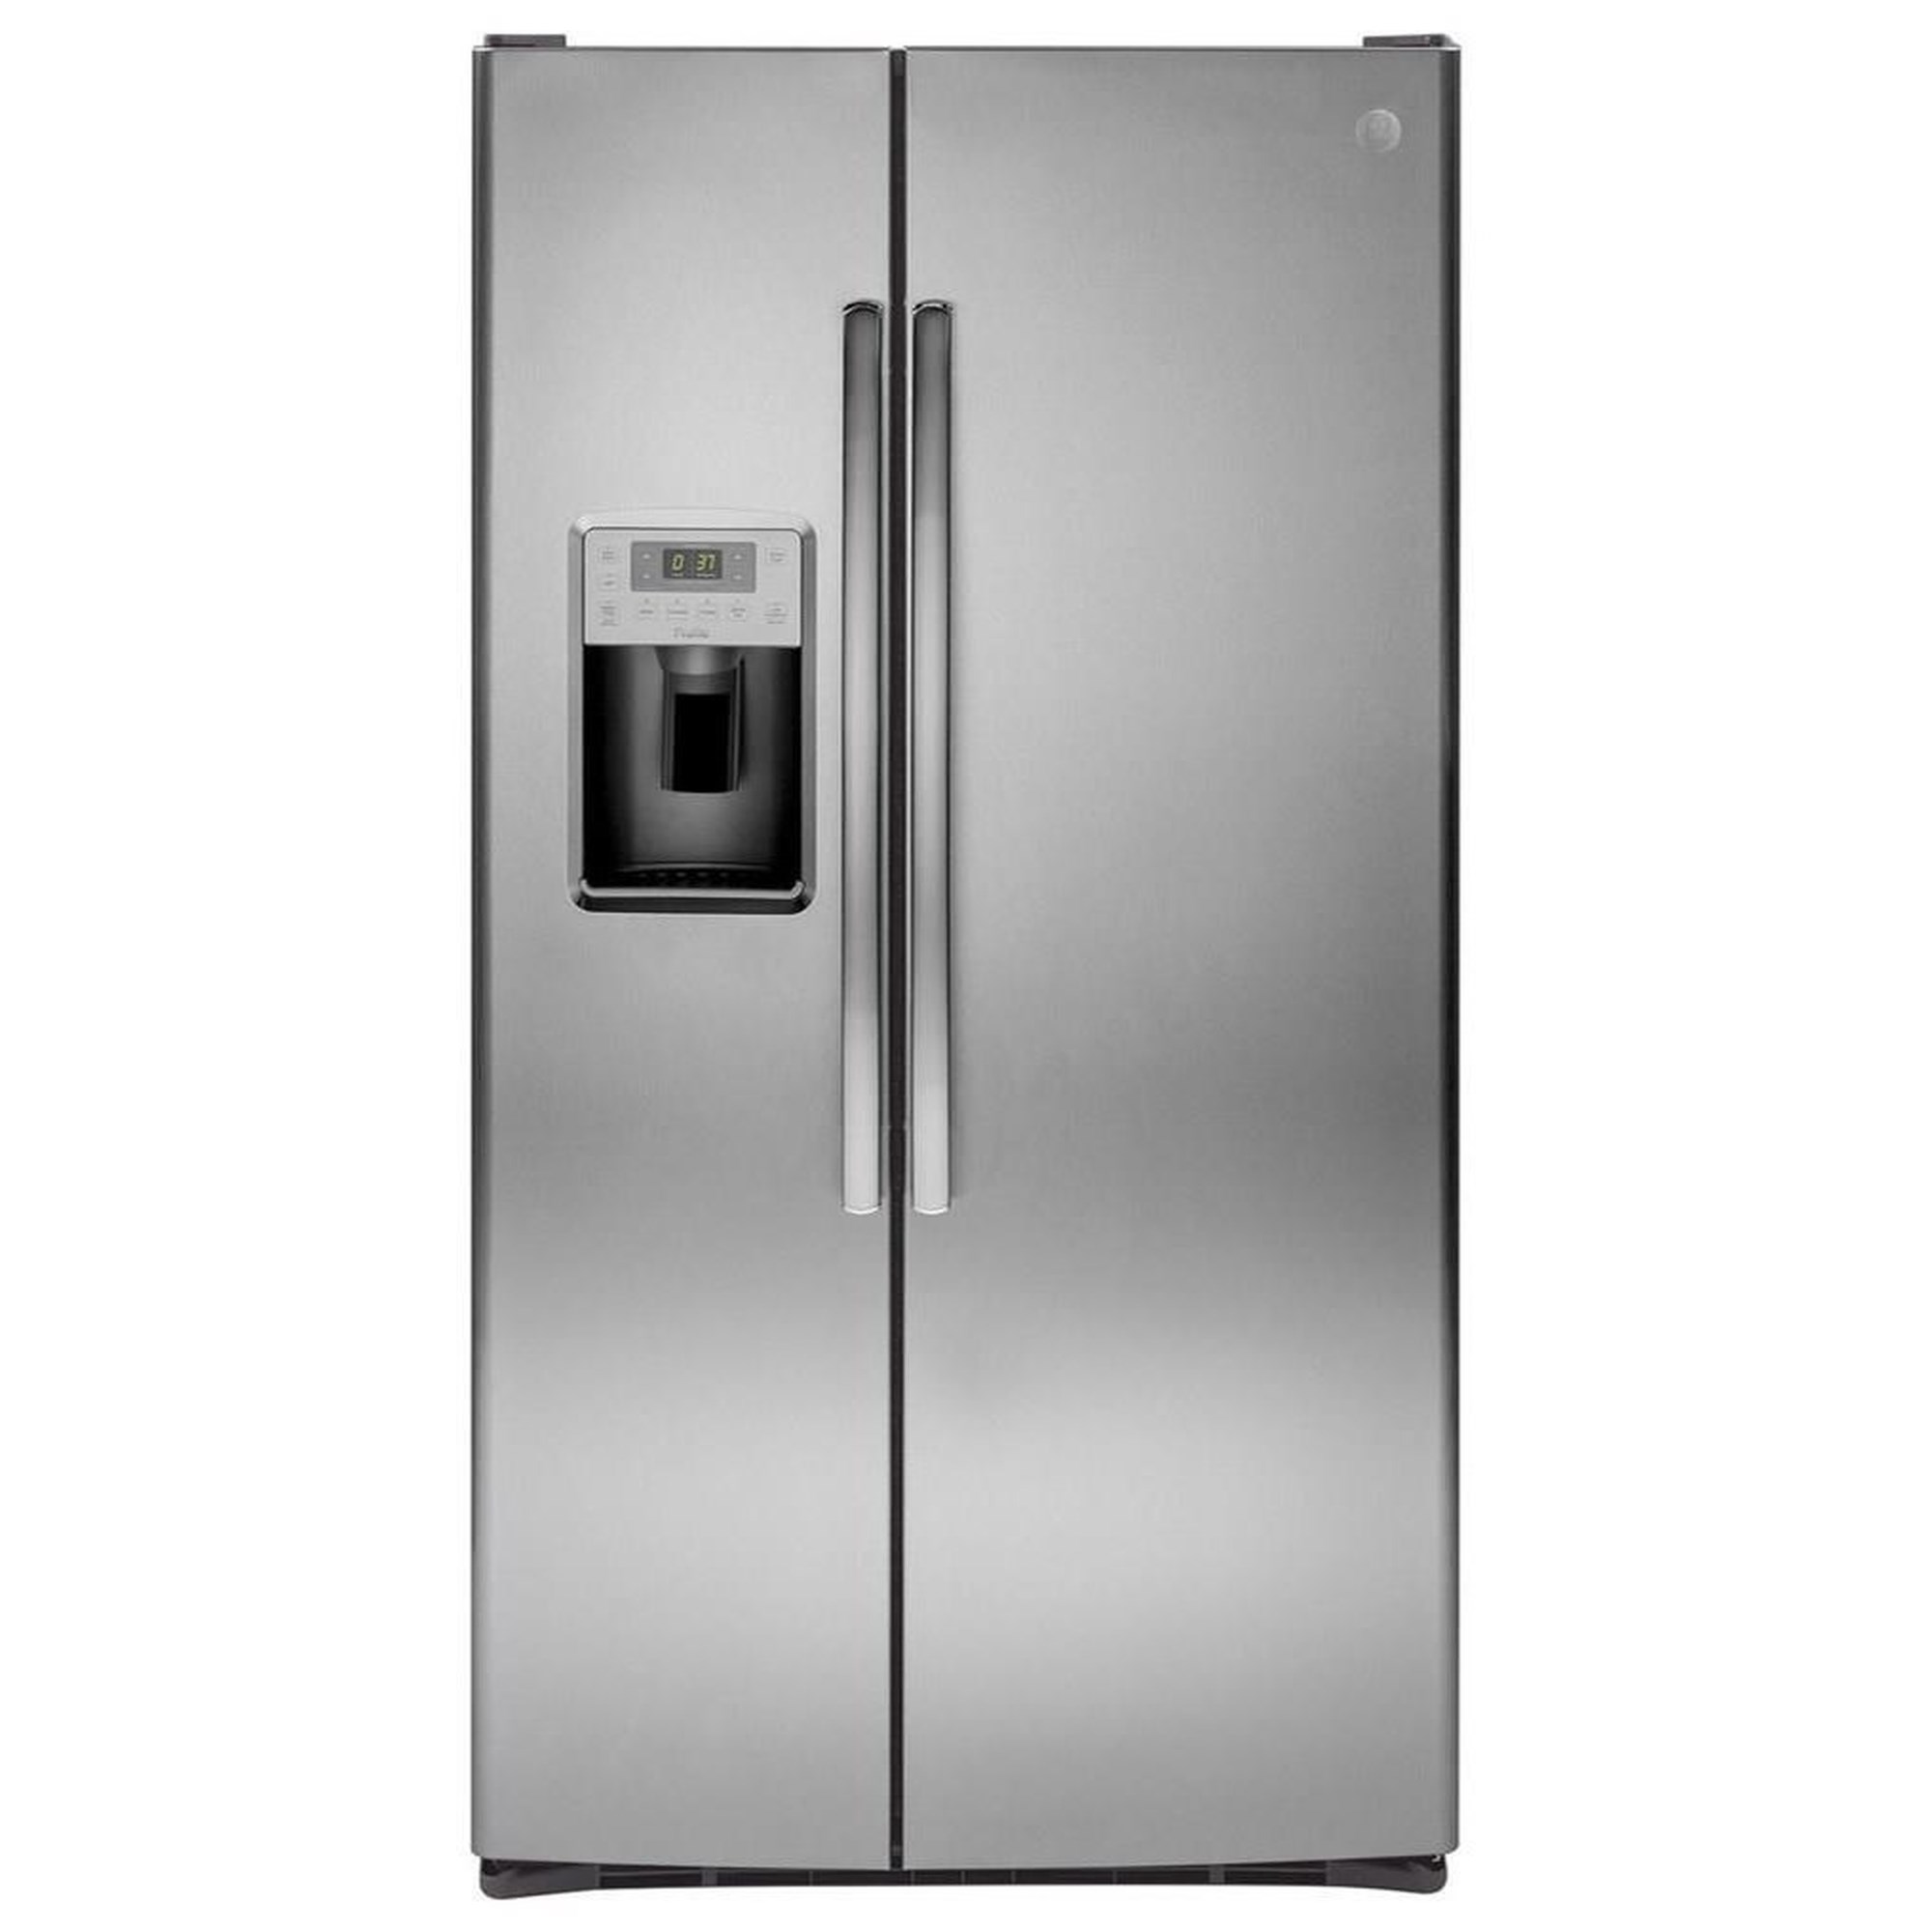 PSB42YSNSS by GE Appliances - GE Profile™ Series 42 Smart Built-In  Side-by-Side Refrigerator with Dispenser